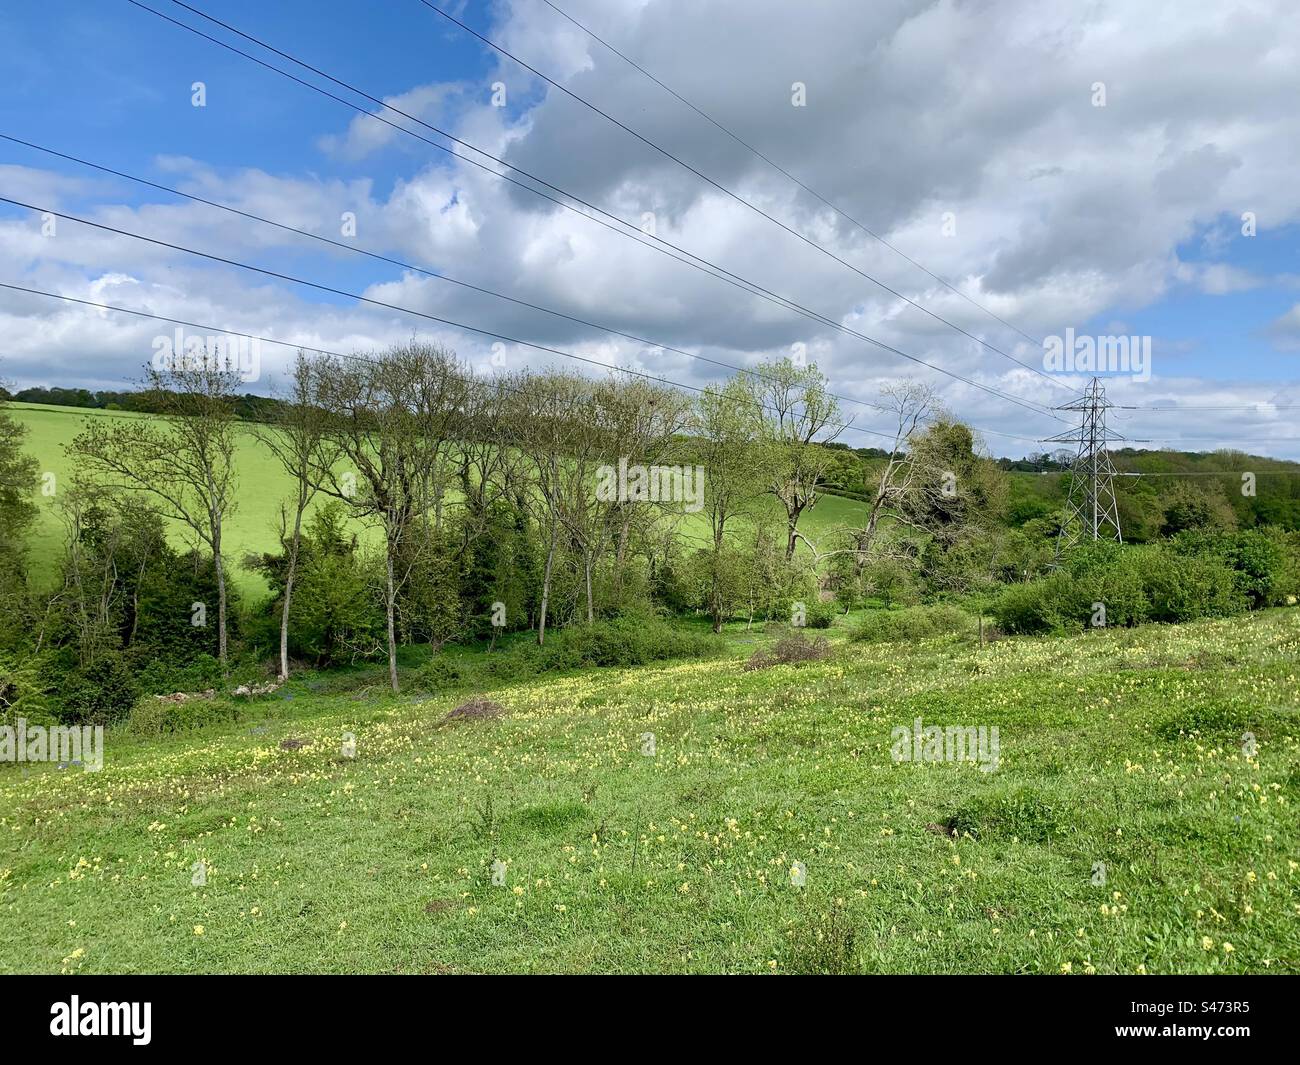 English countryside with row of trees and a pylon Stock Photo